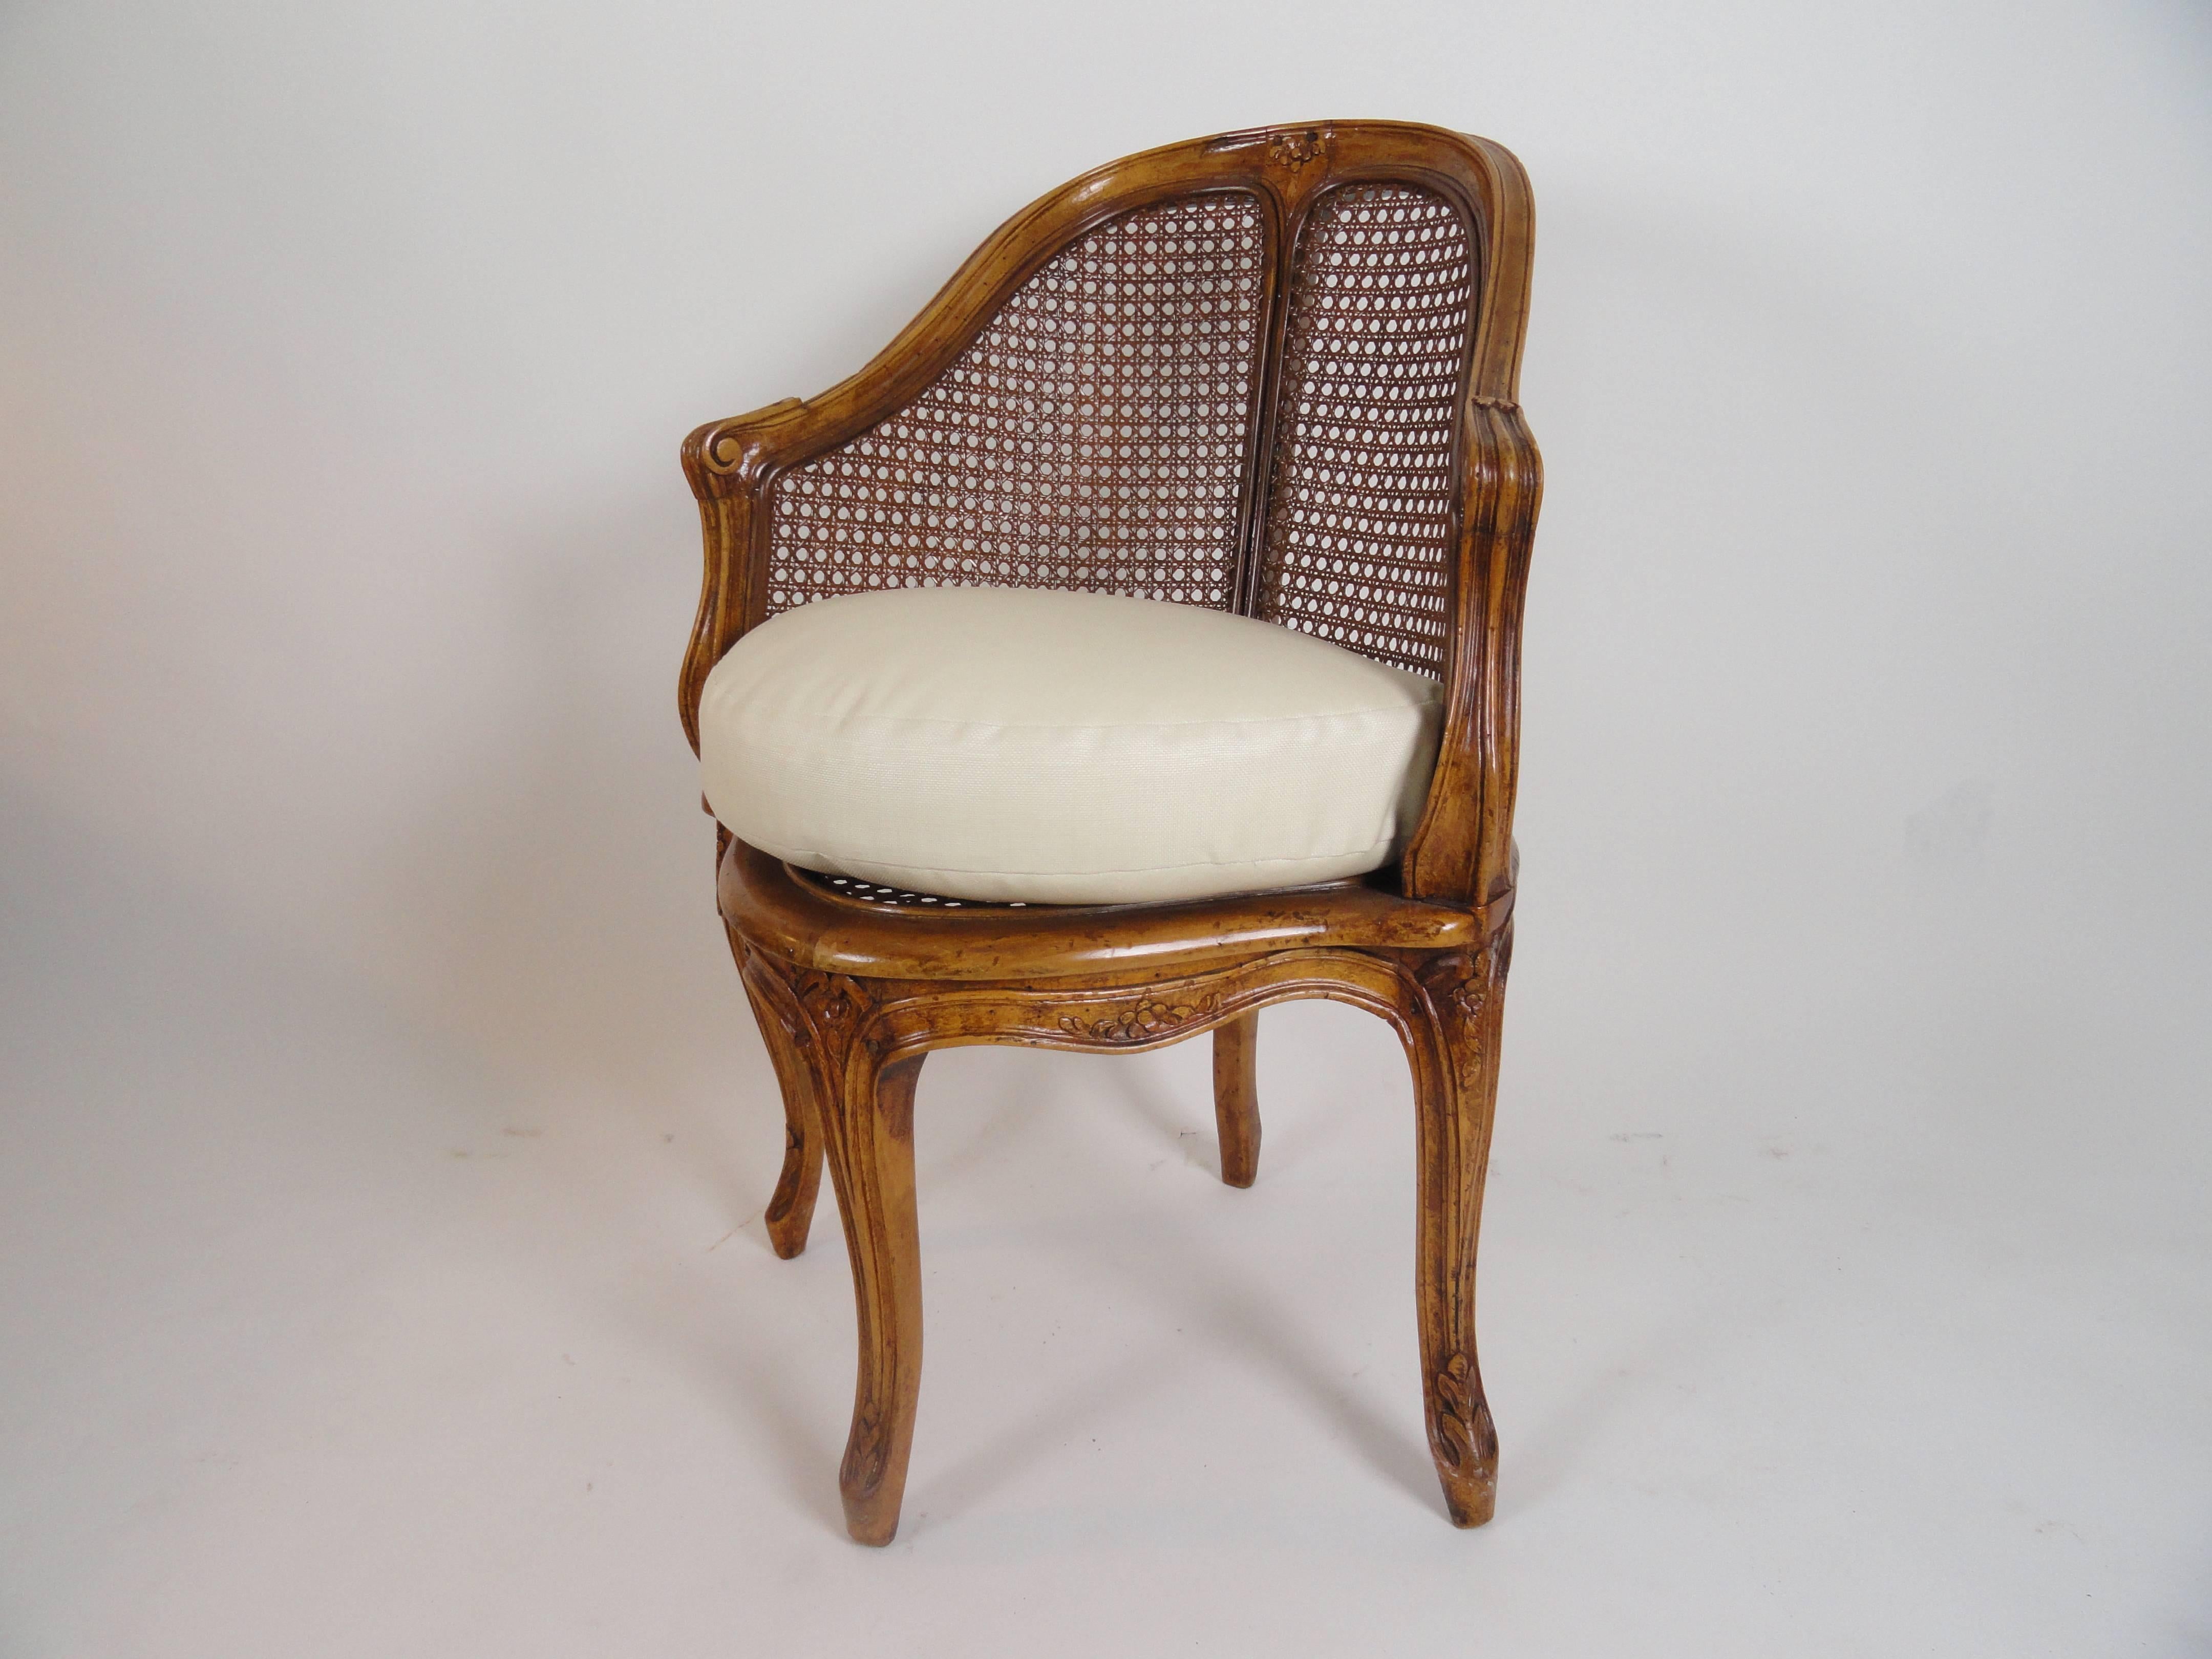 Louis XV-style fauteuil de cabinet. Beautifully carved beechwood with cane seat and back and thick cushion in off-white fabric.